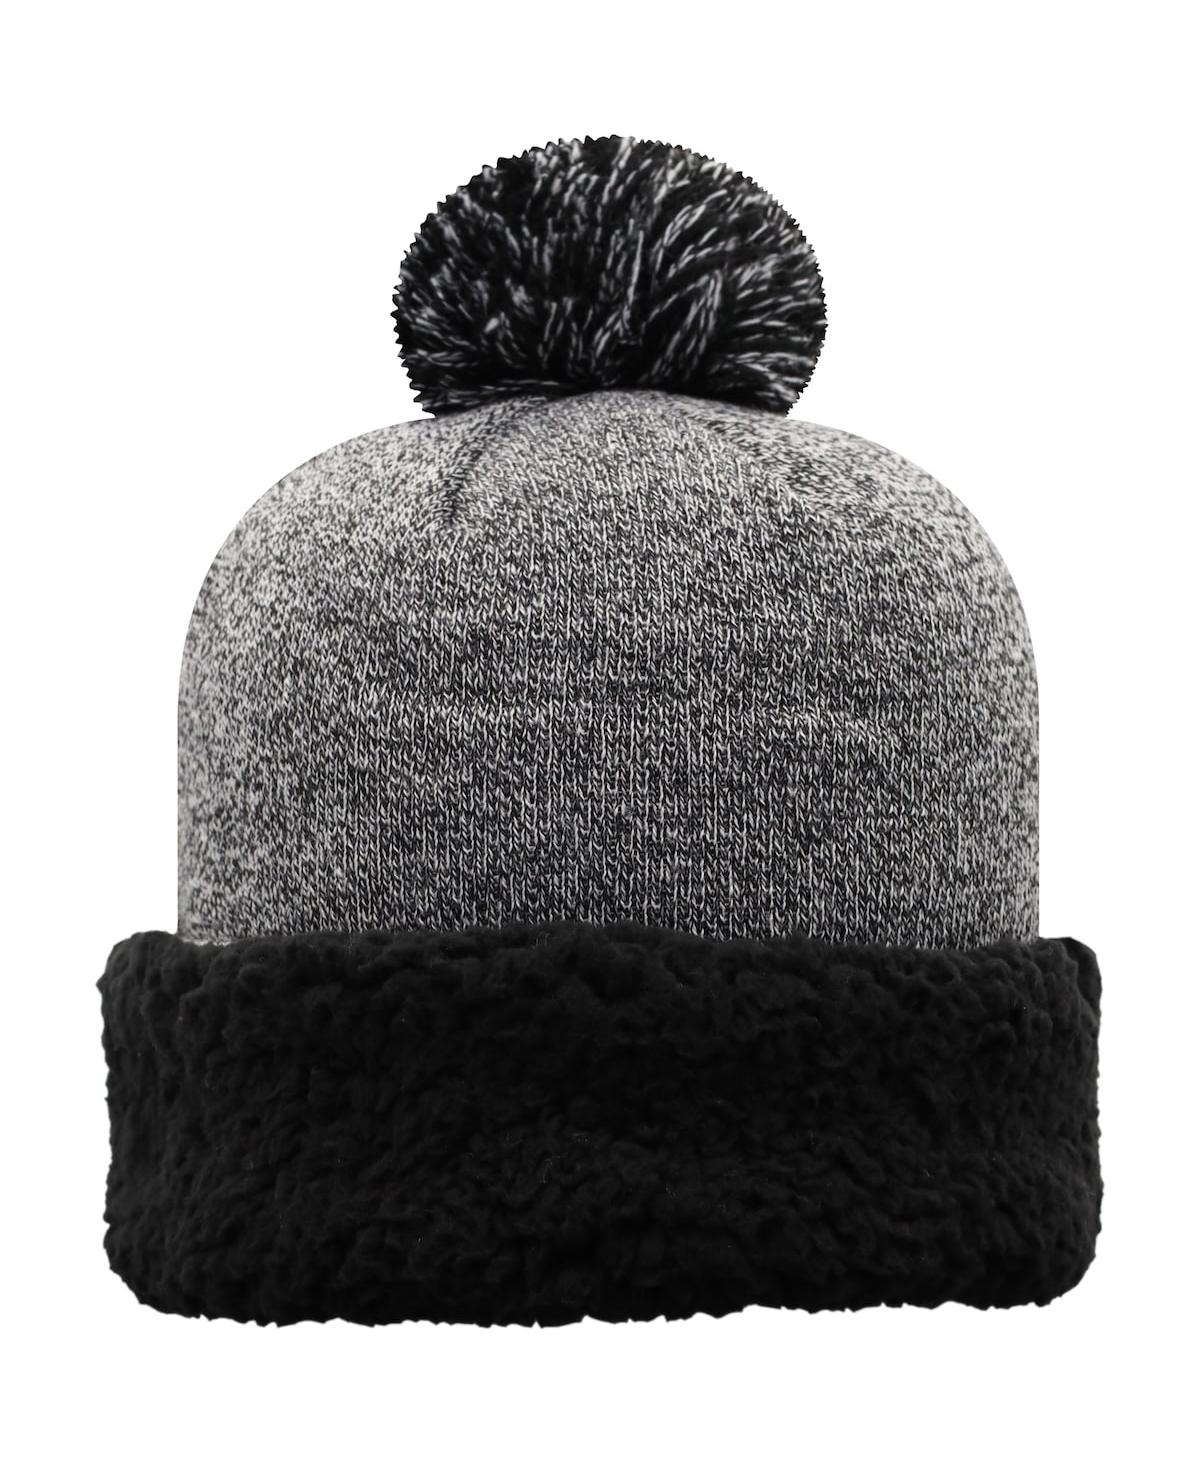 Shop Top Of The World Women's  Black West Virginia Mountaineers Snug Cuffed Knit Hat With Pom